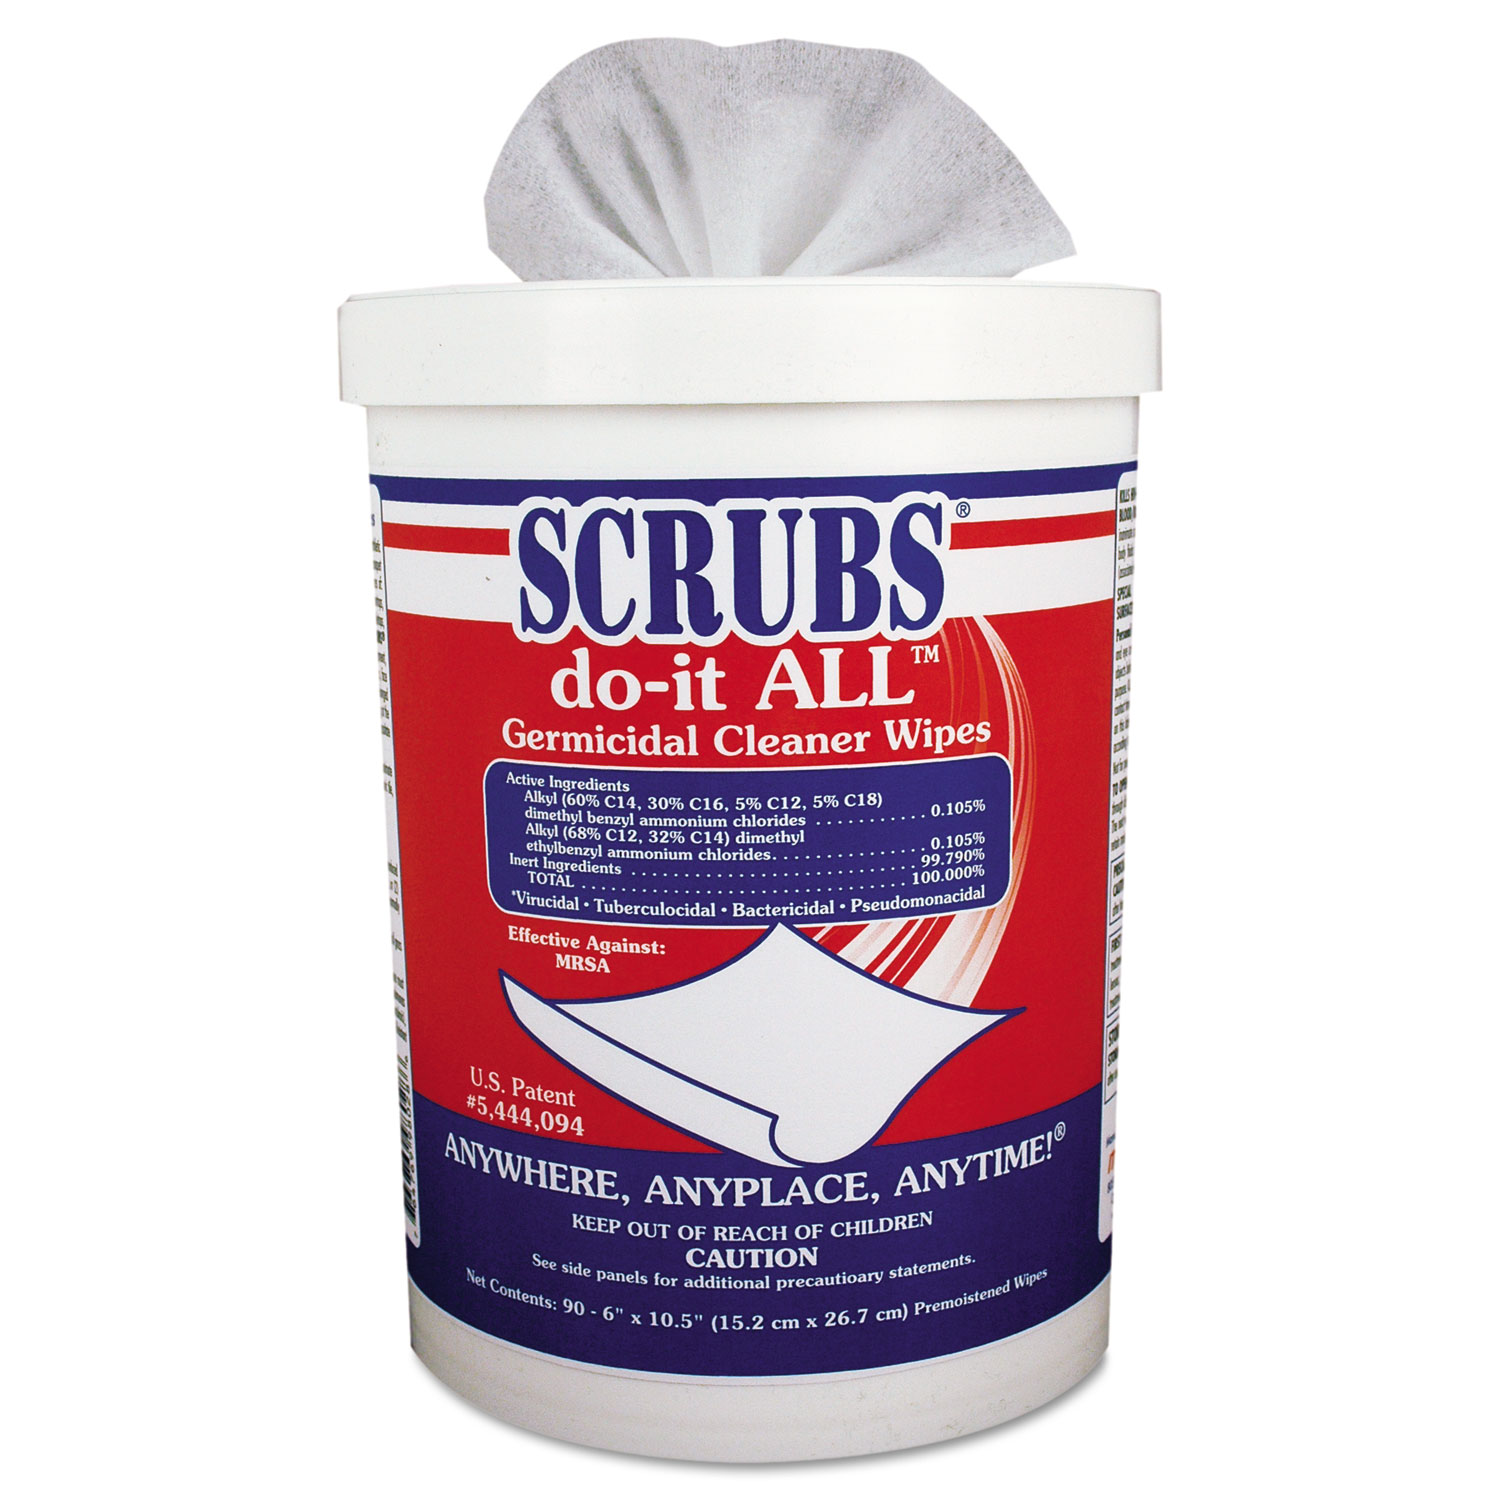 Scrubs ITW98028 do-it ALL Germicidal Cleaner Wipes, 6 x 10.5, Lemon-Lime, 90/Canister